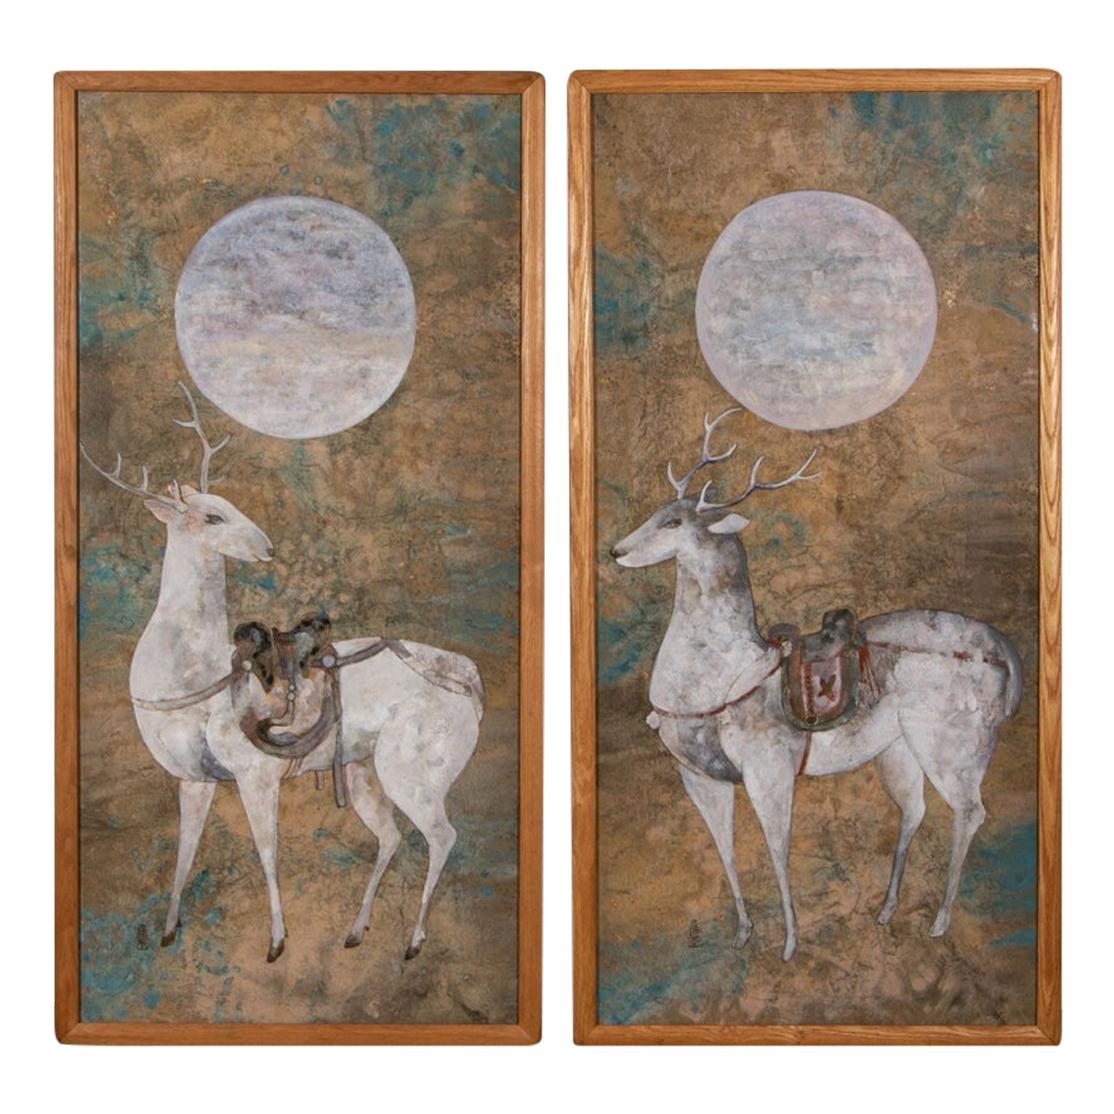 Pair of Large Scale Midcentury Asian Style Works on Paper of Stags at Night